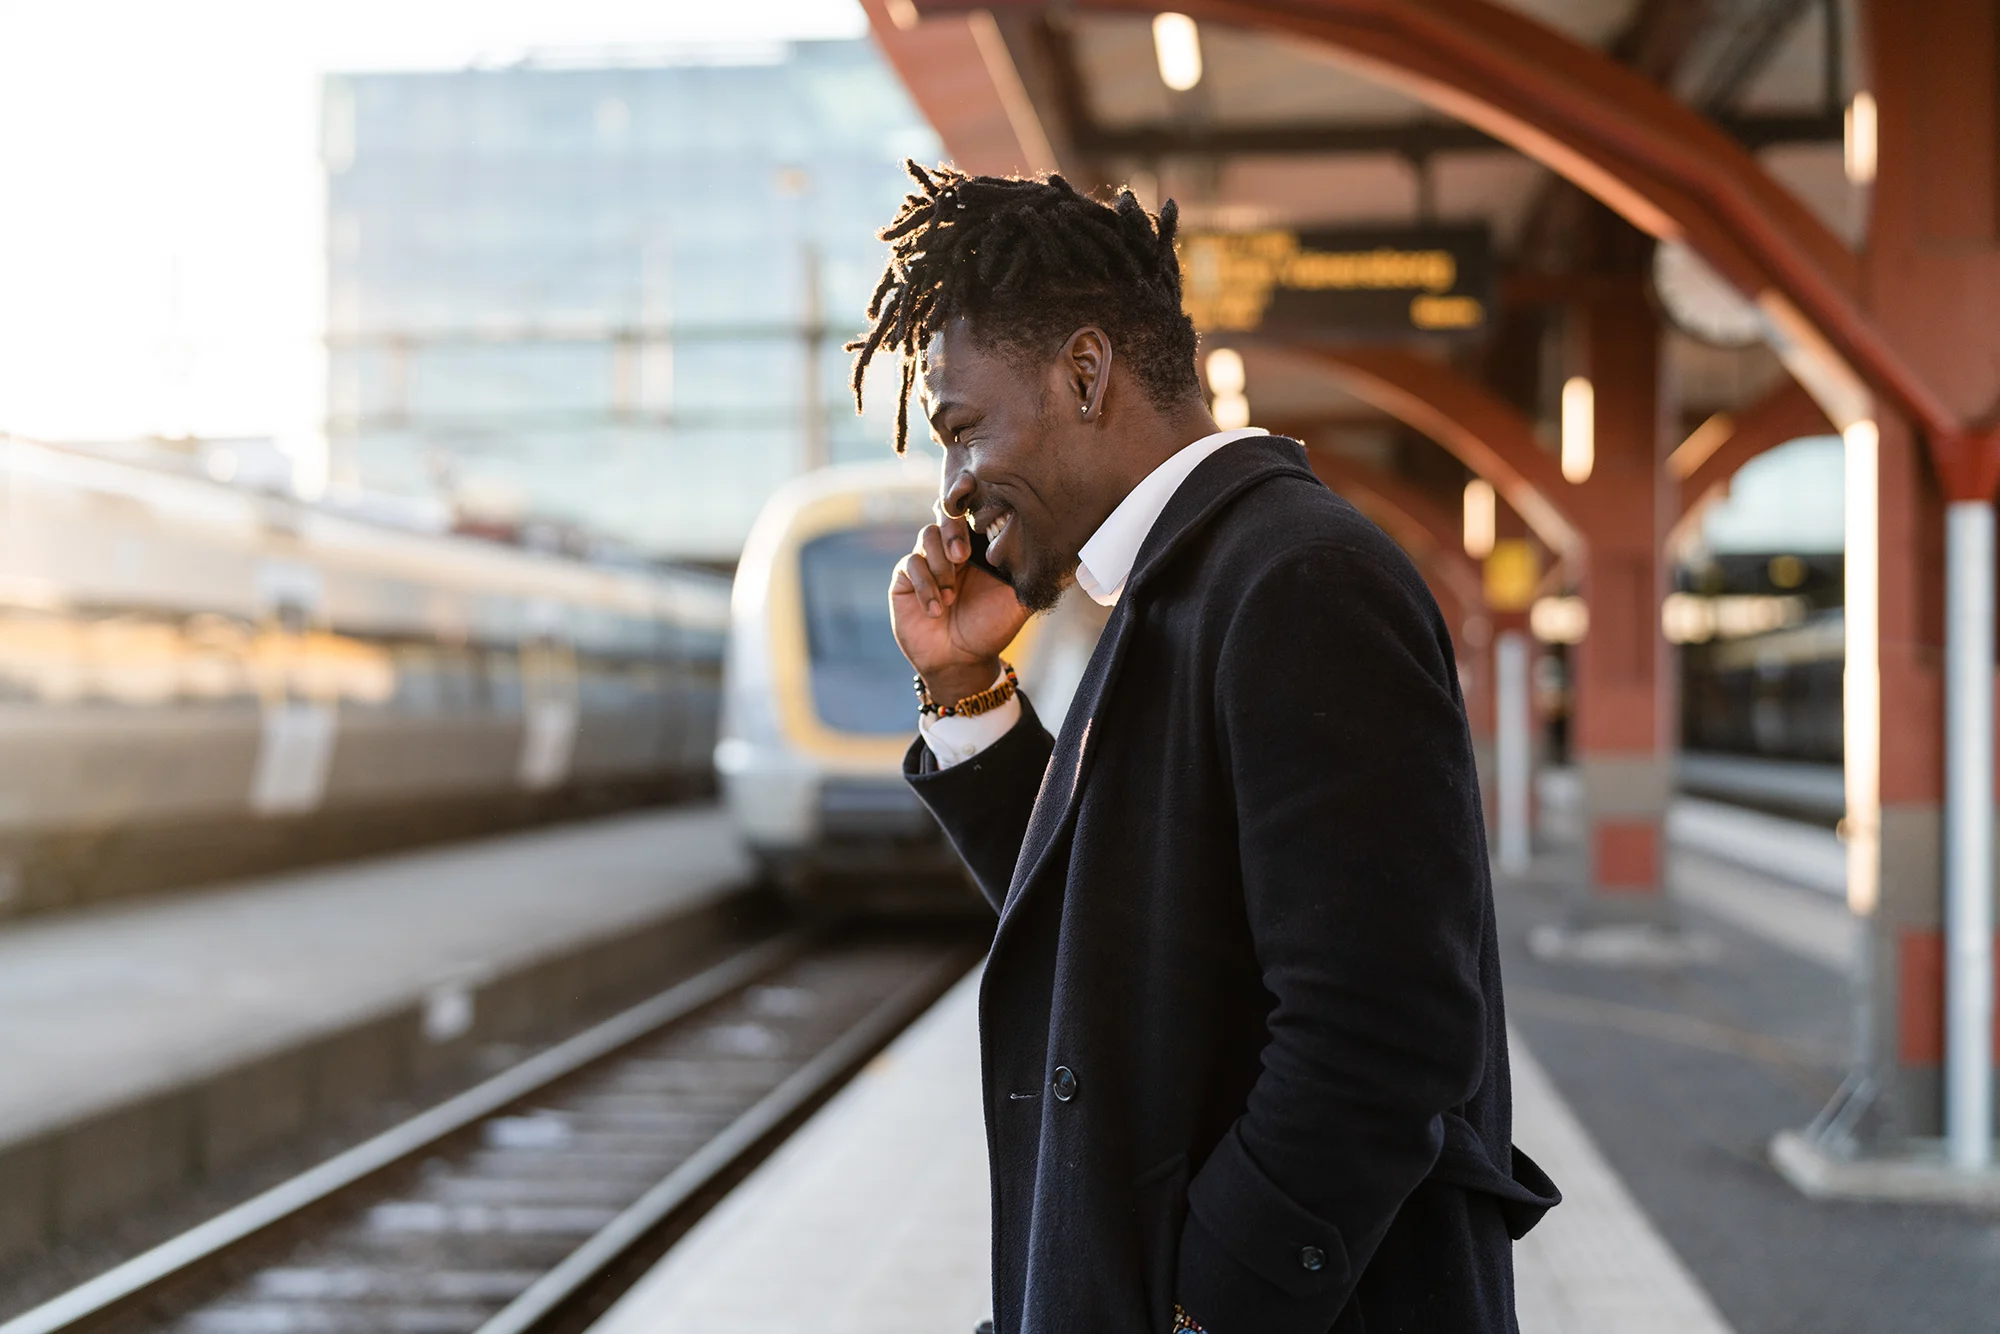 A businessman talks on the phone at a railway station while waiting for a train to pull into the platform